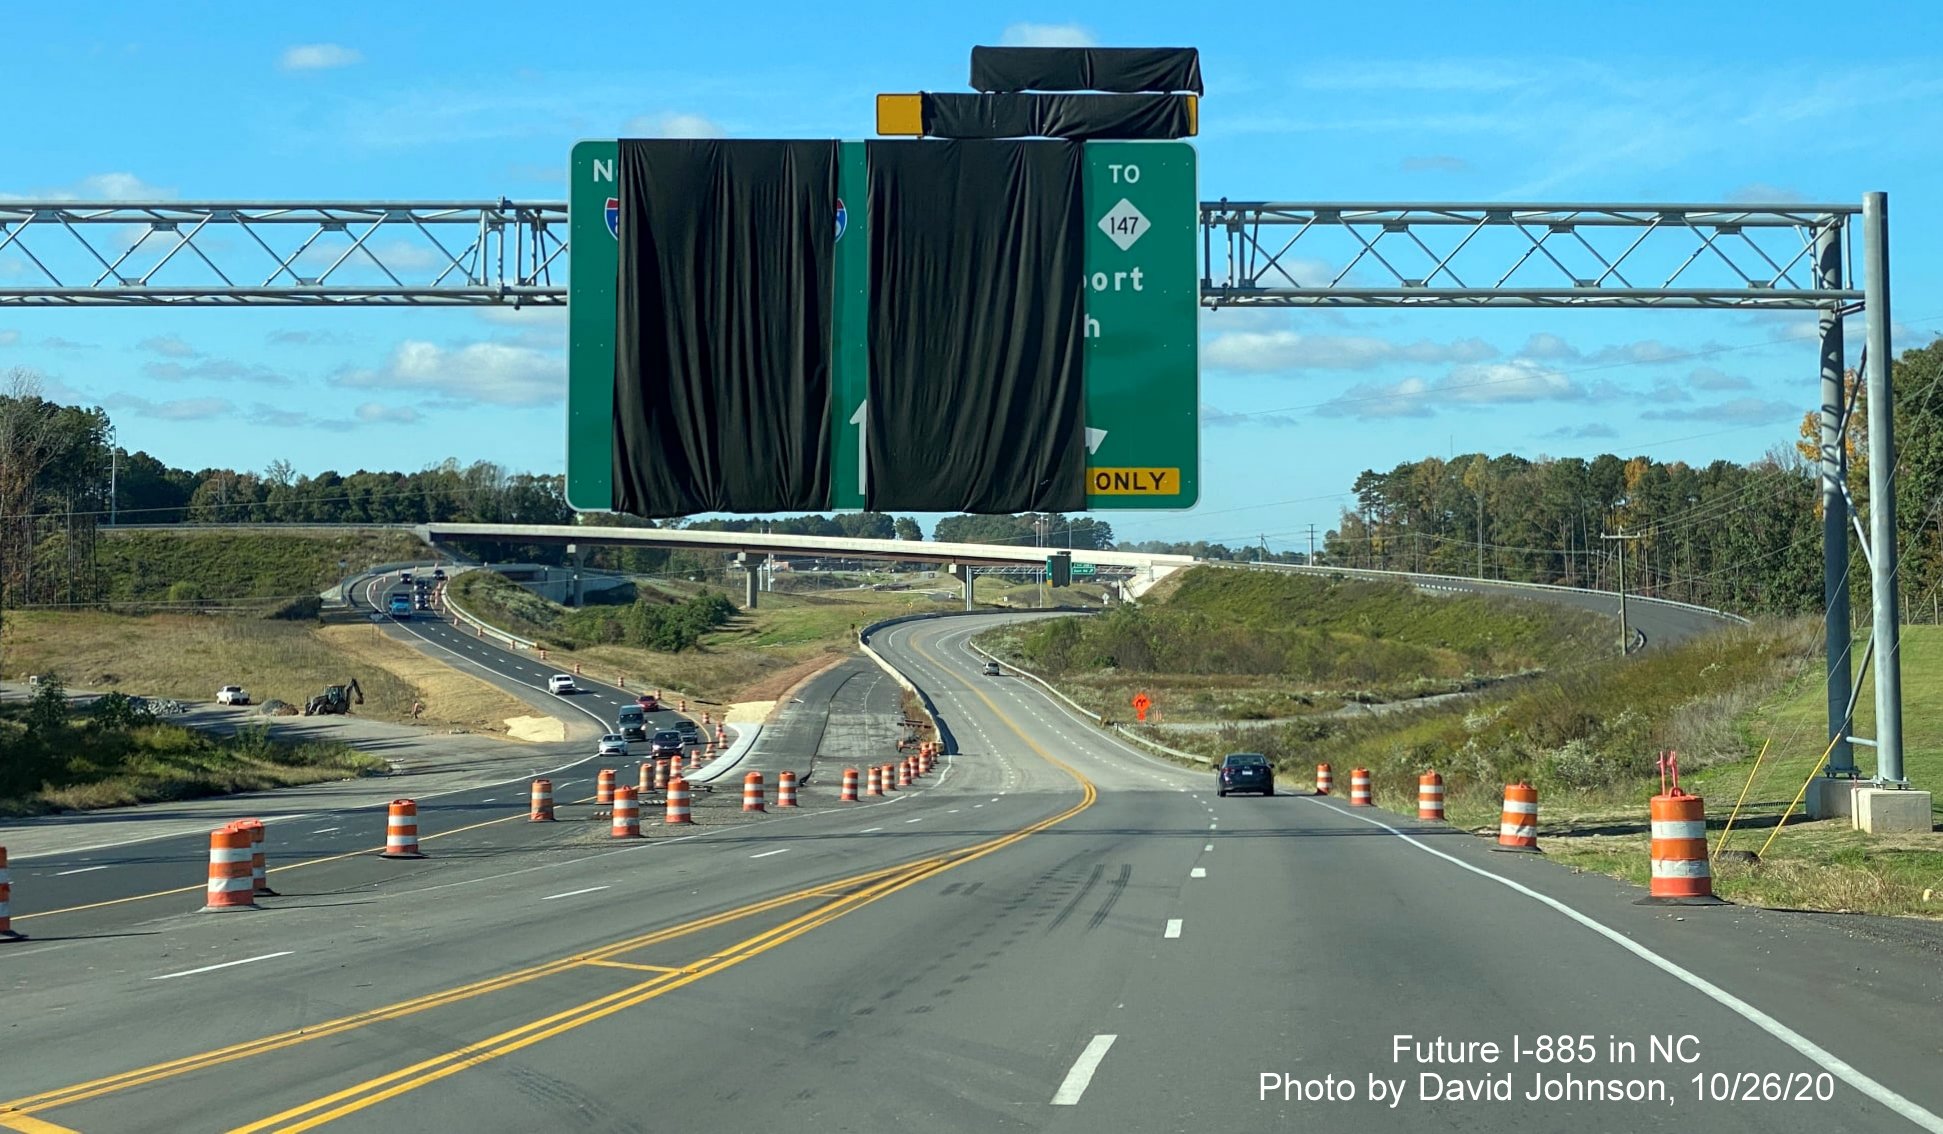 Image of newly placed overhead sign on US 70 West in Durham prior to Future I-885/East End Connector interchange, by David Johnson October 2020